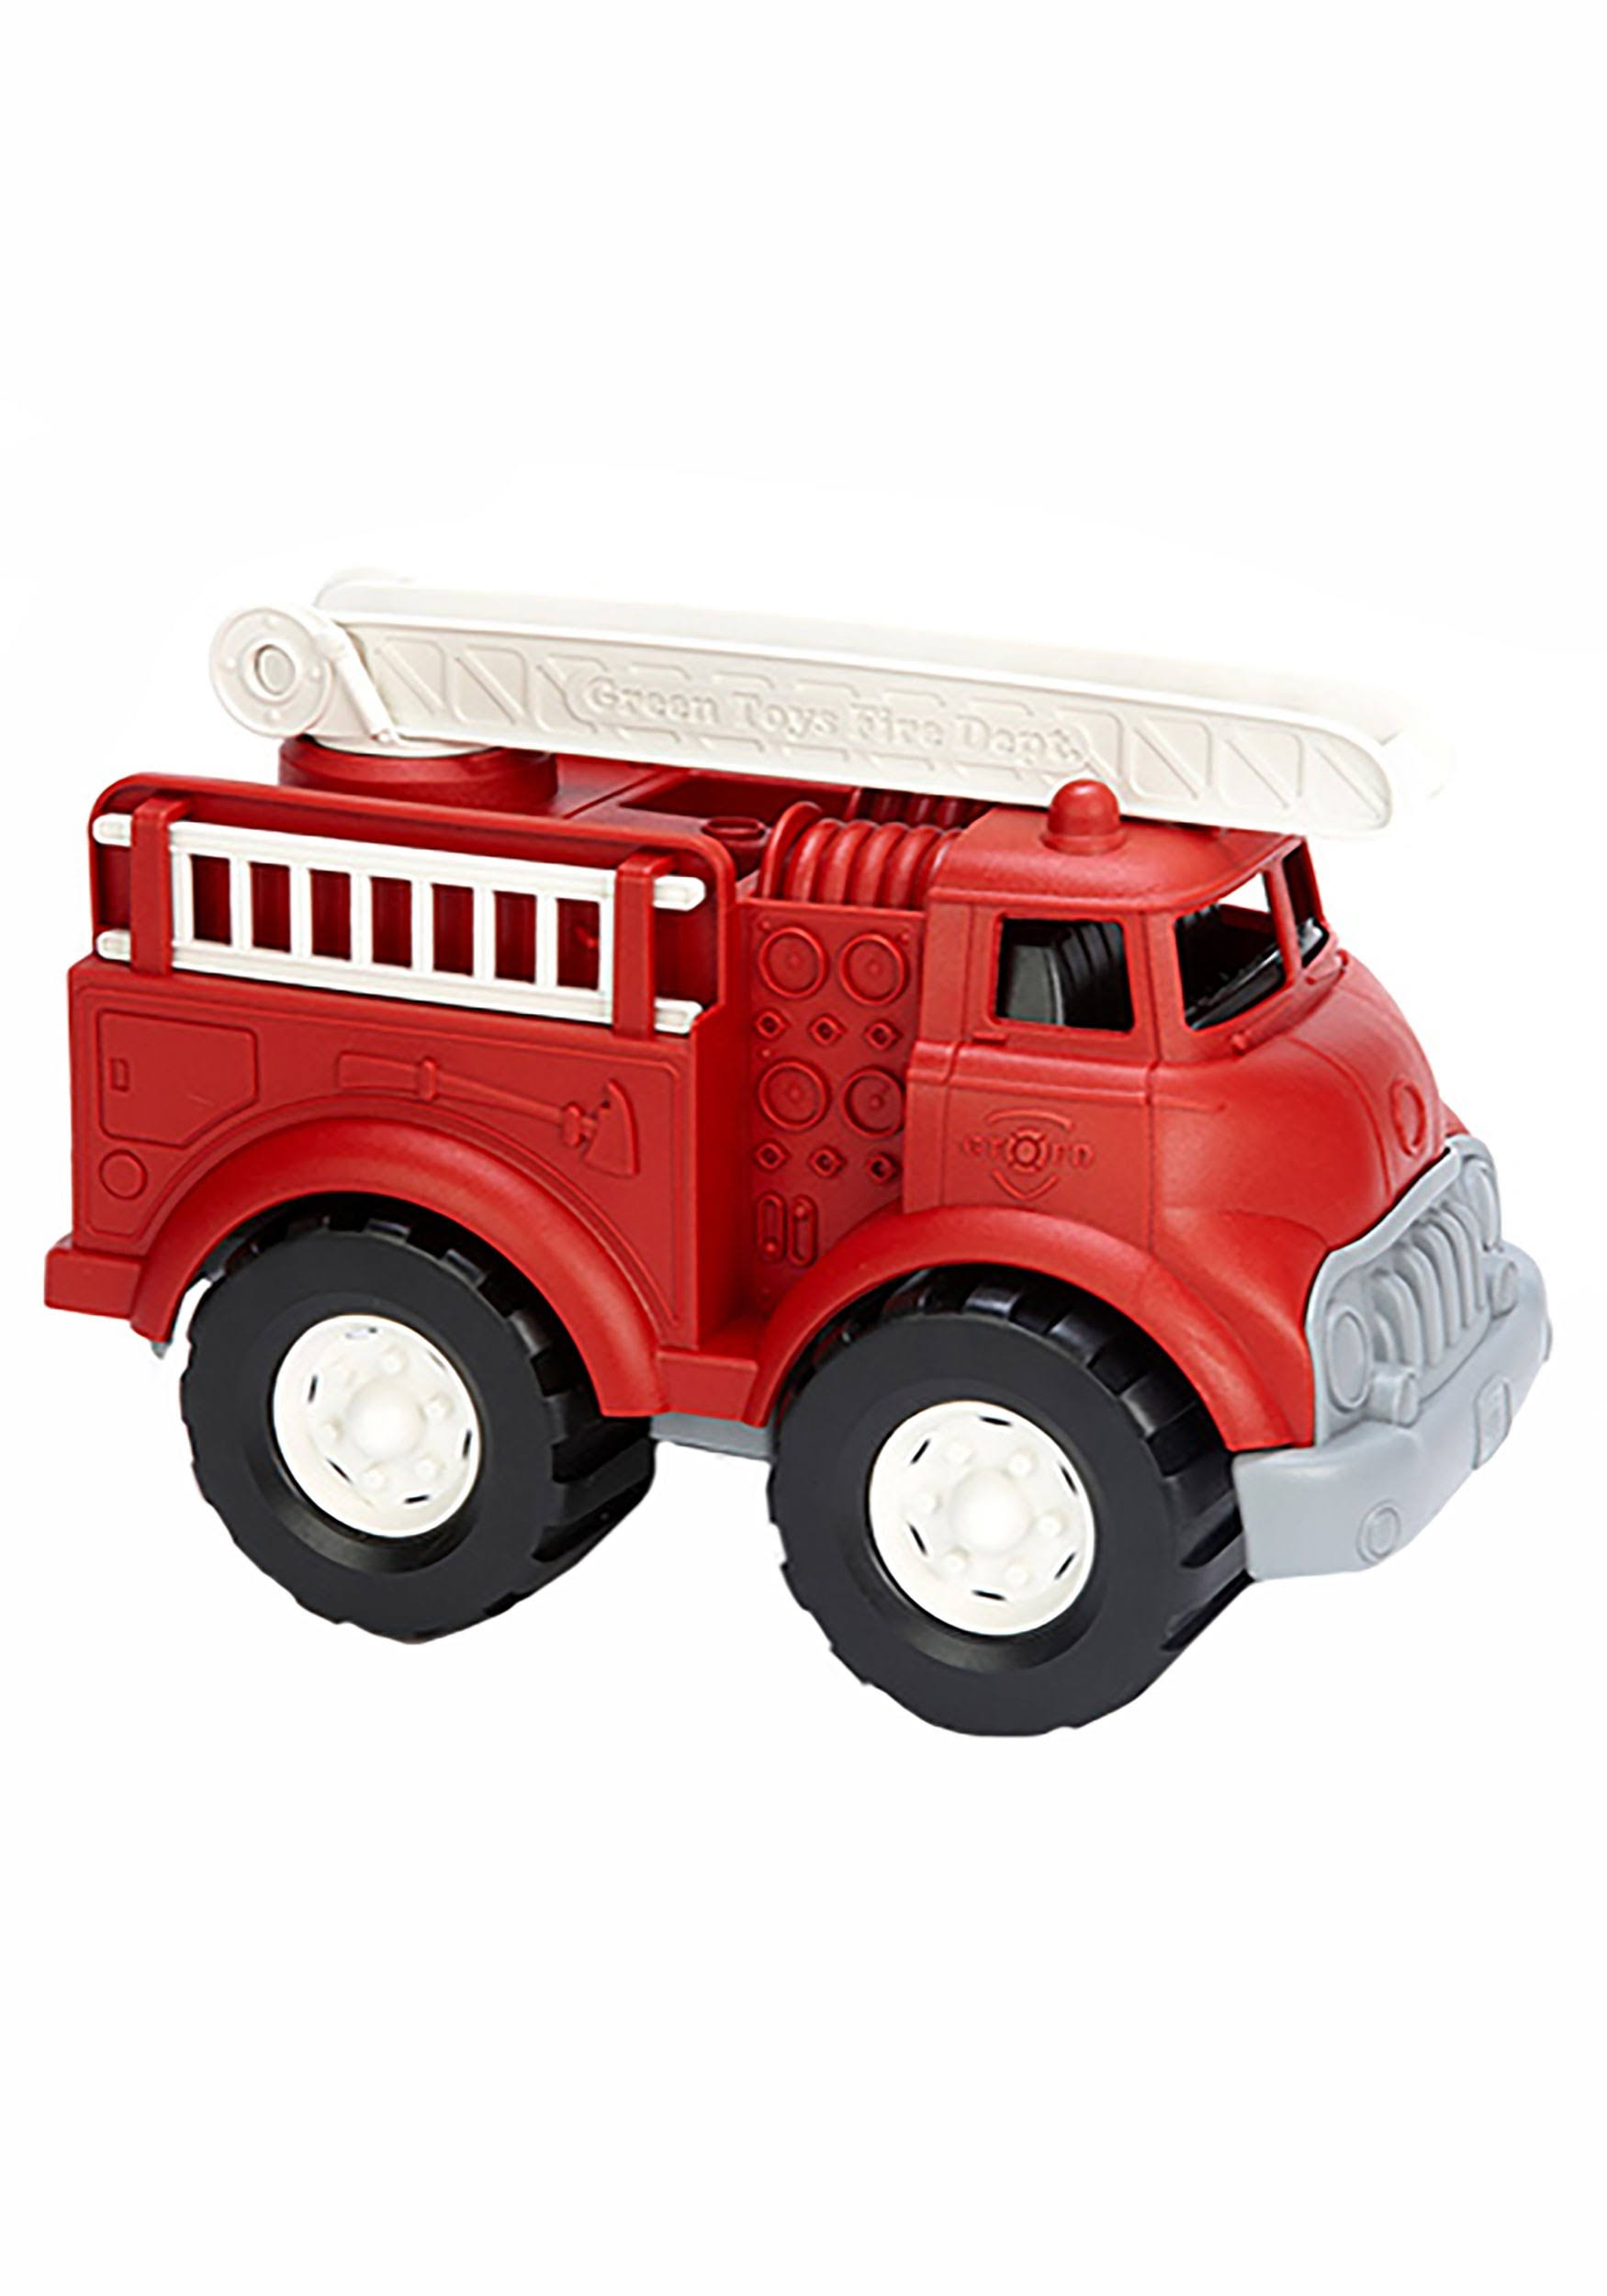 My First Green Toys Fire Truck Baby Toy - for 1 Year up